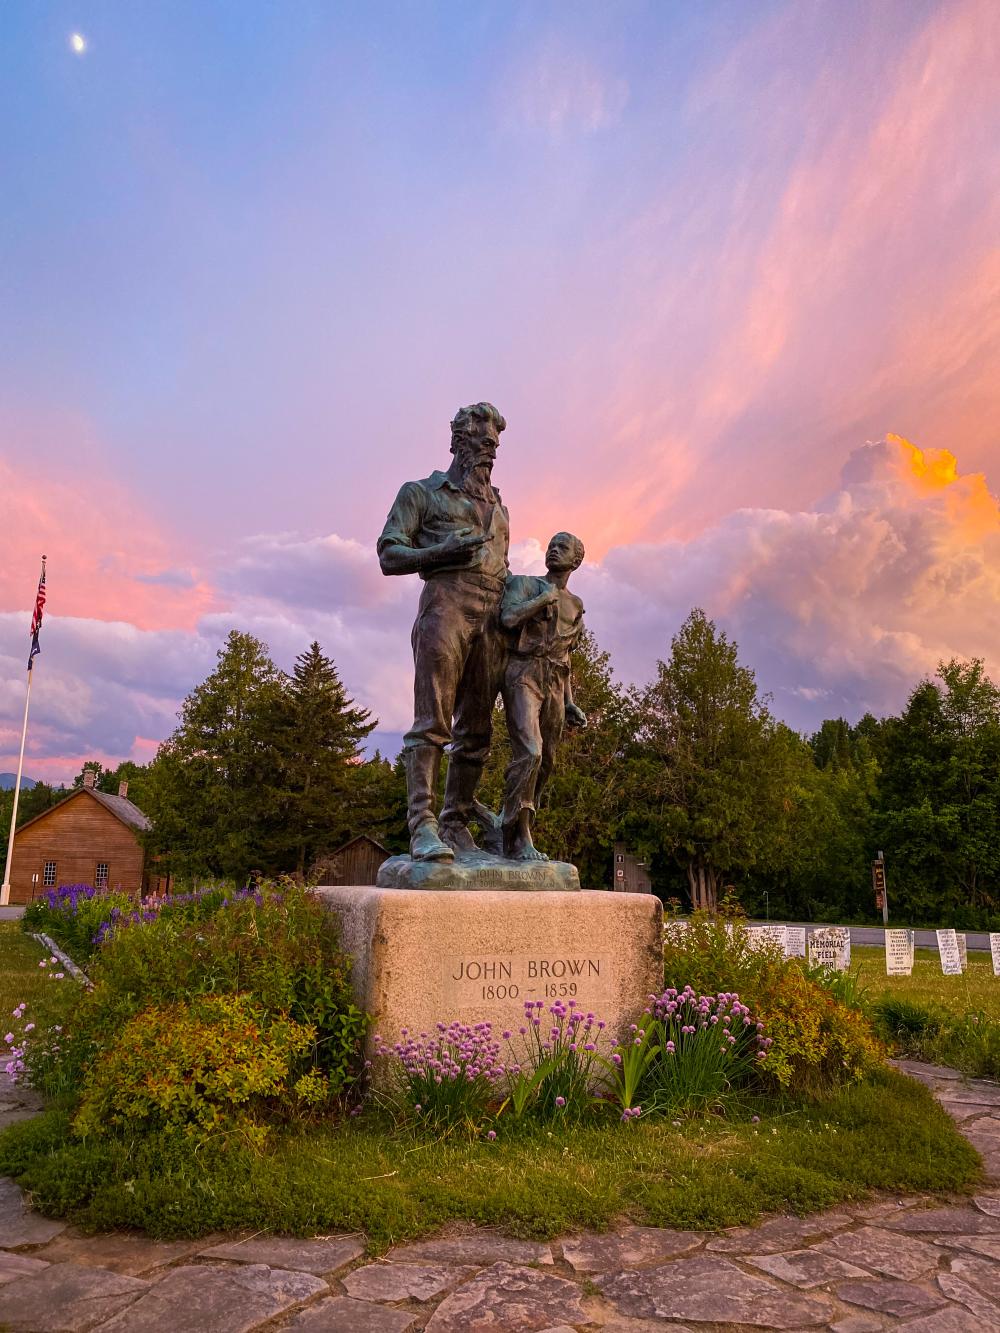 A statue of a man and child at John Brown Farm Historic site.